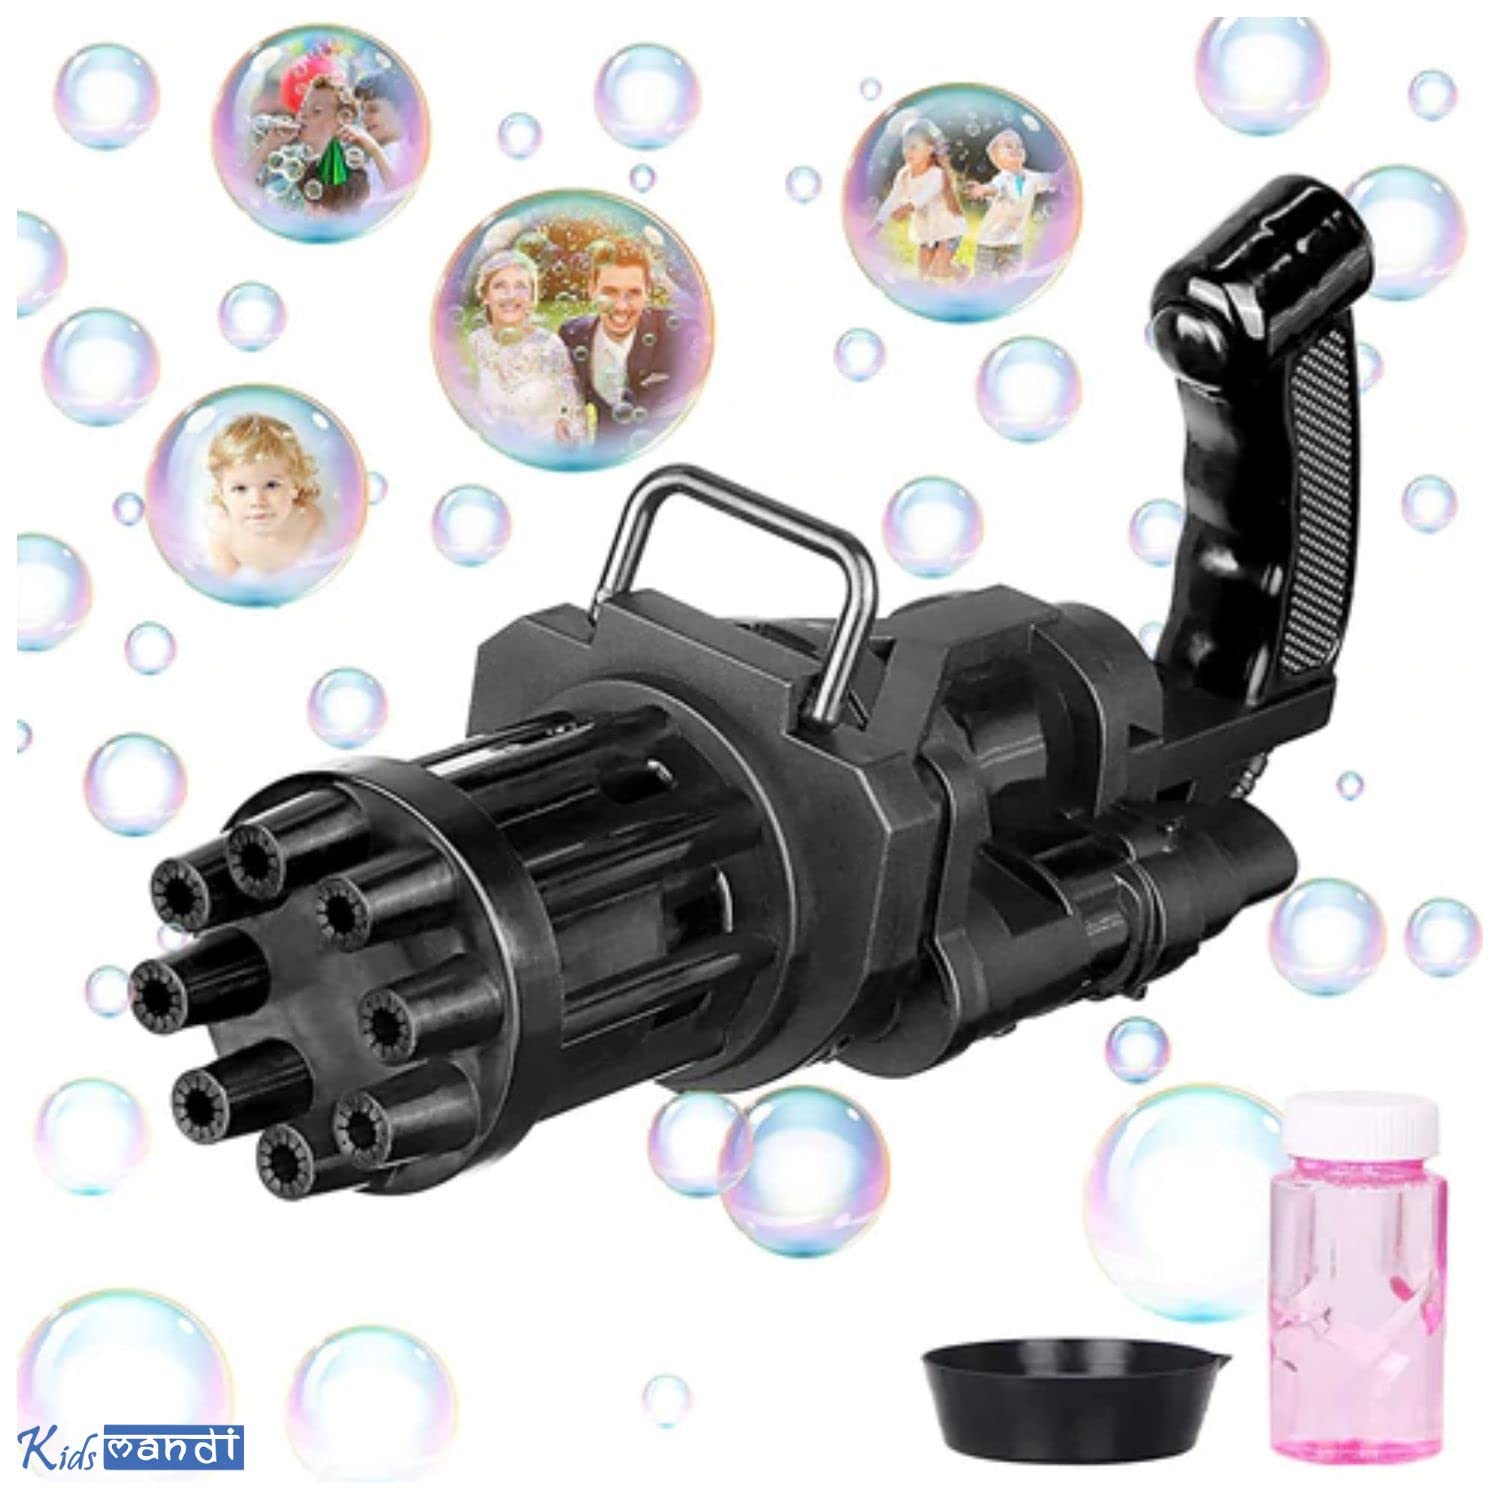 Kids Mandi 8-hole battery-operated bubbles gun floating in air bubbles.